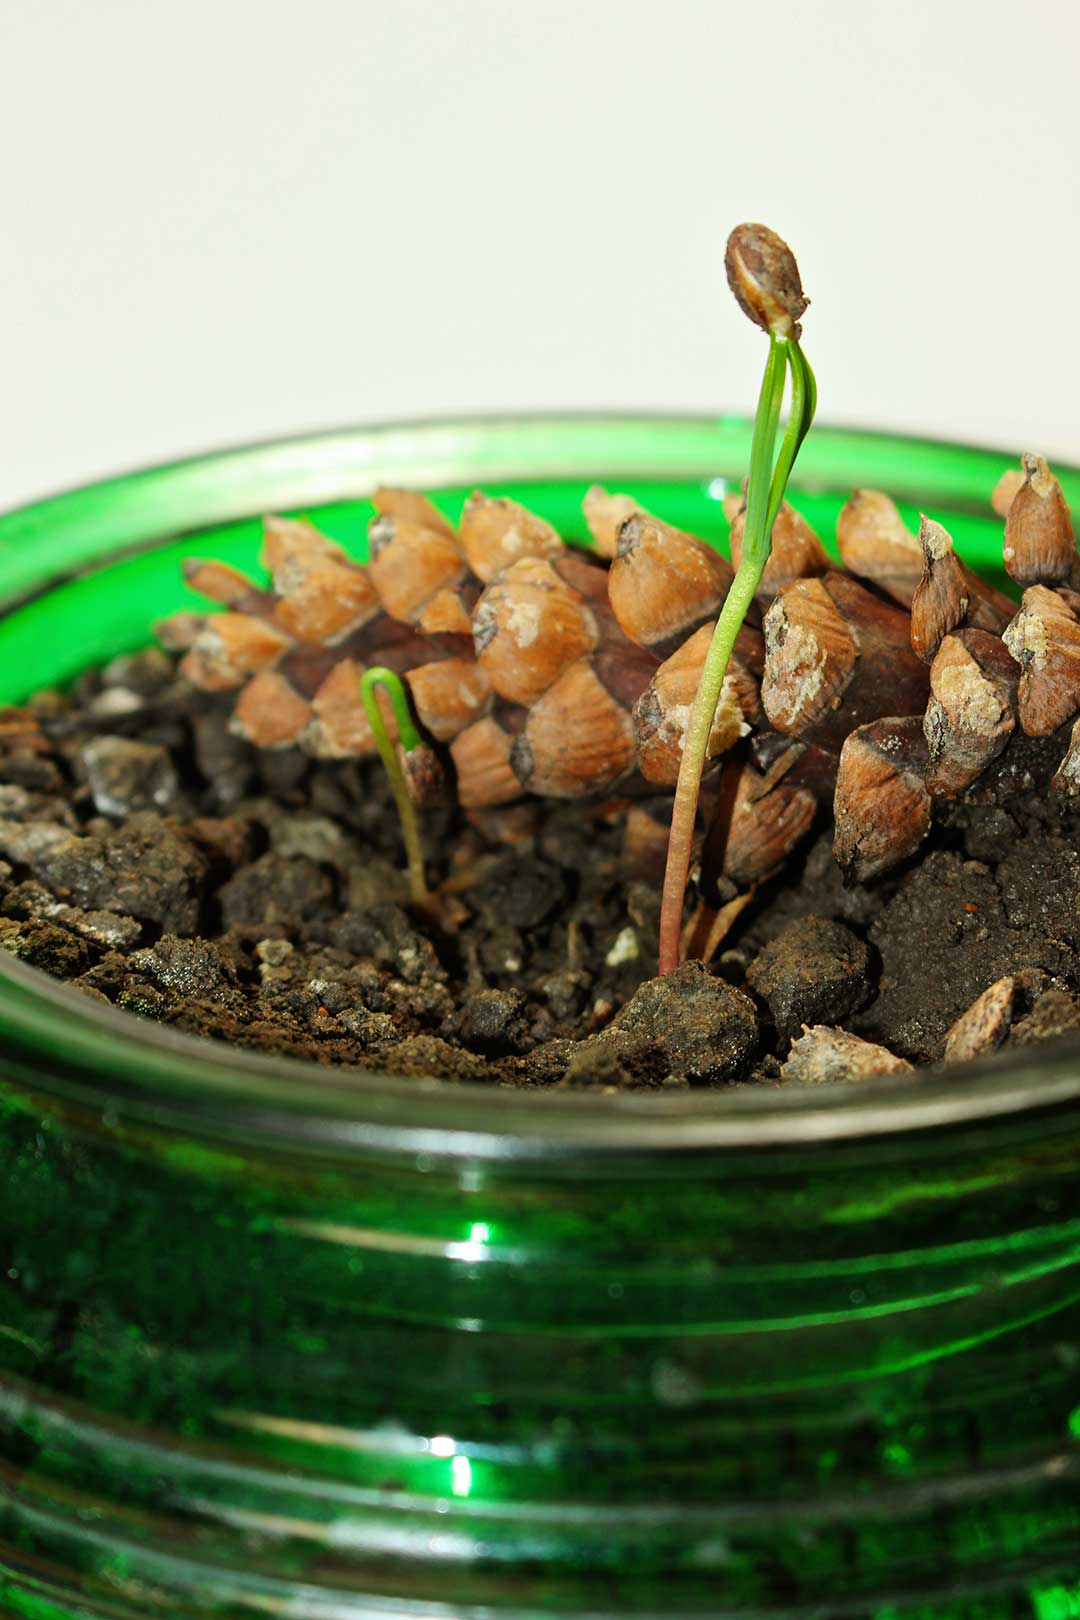 Close up view of a sprout growing in a glass green pot.
